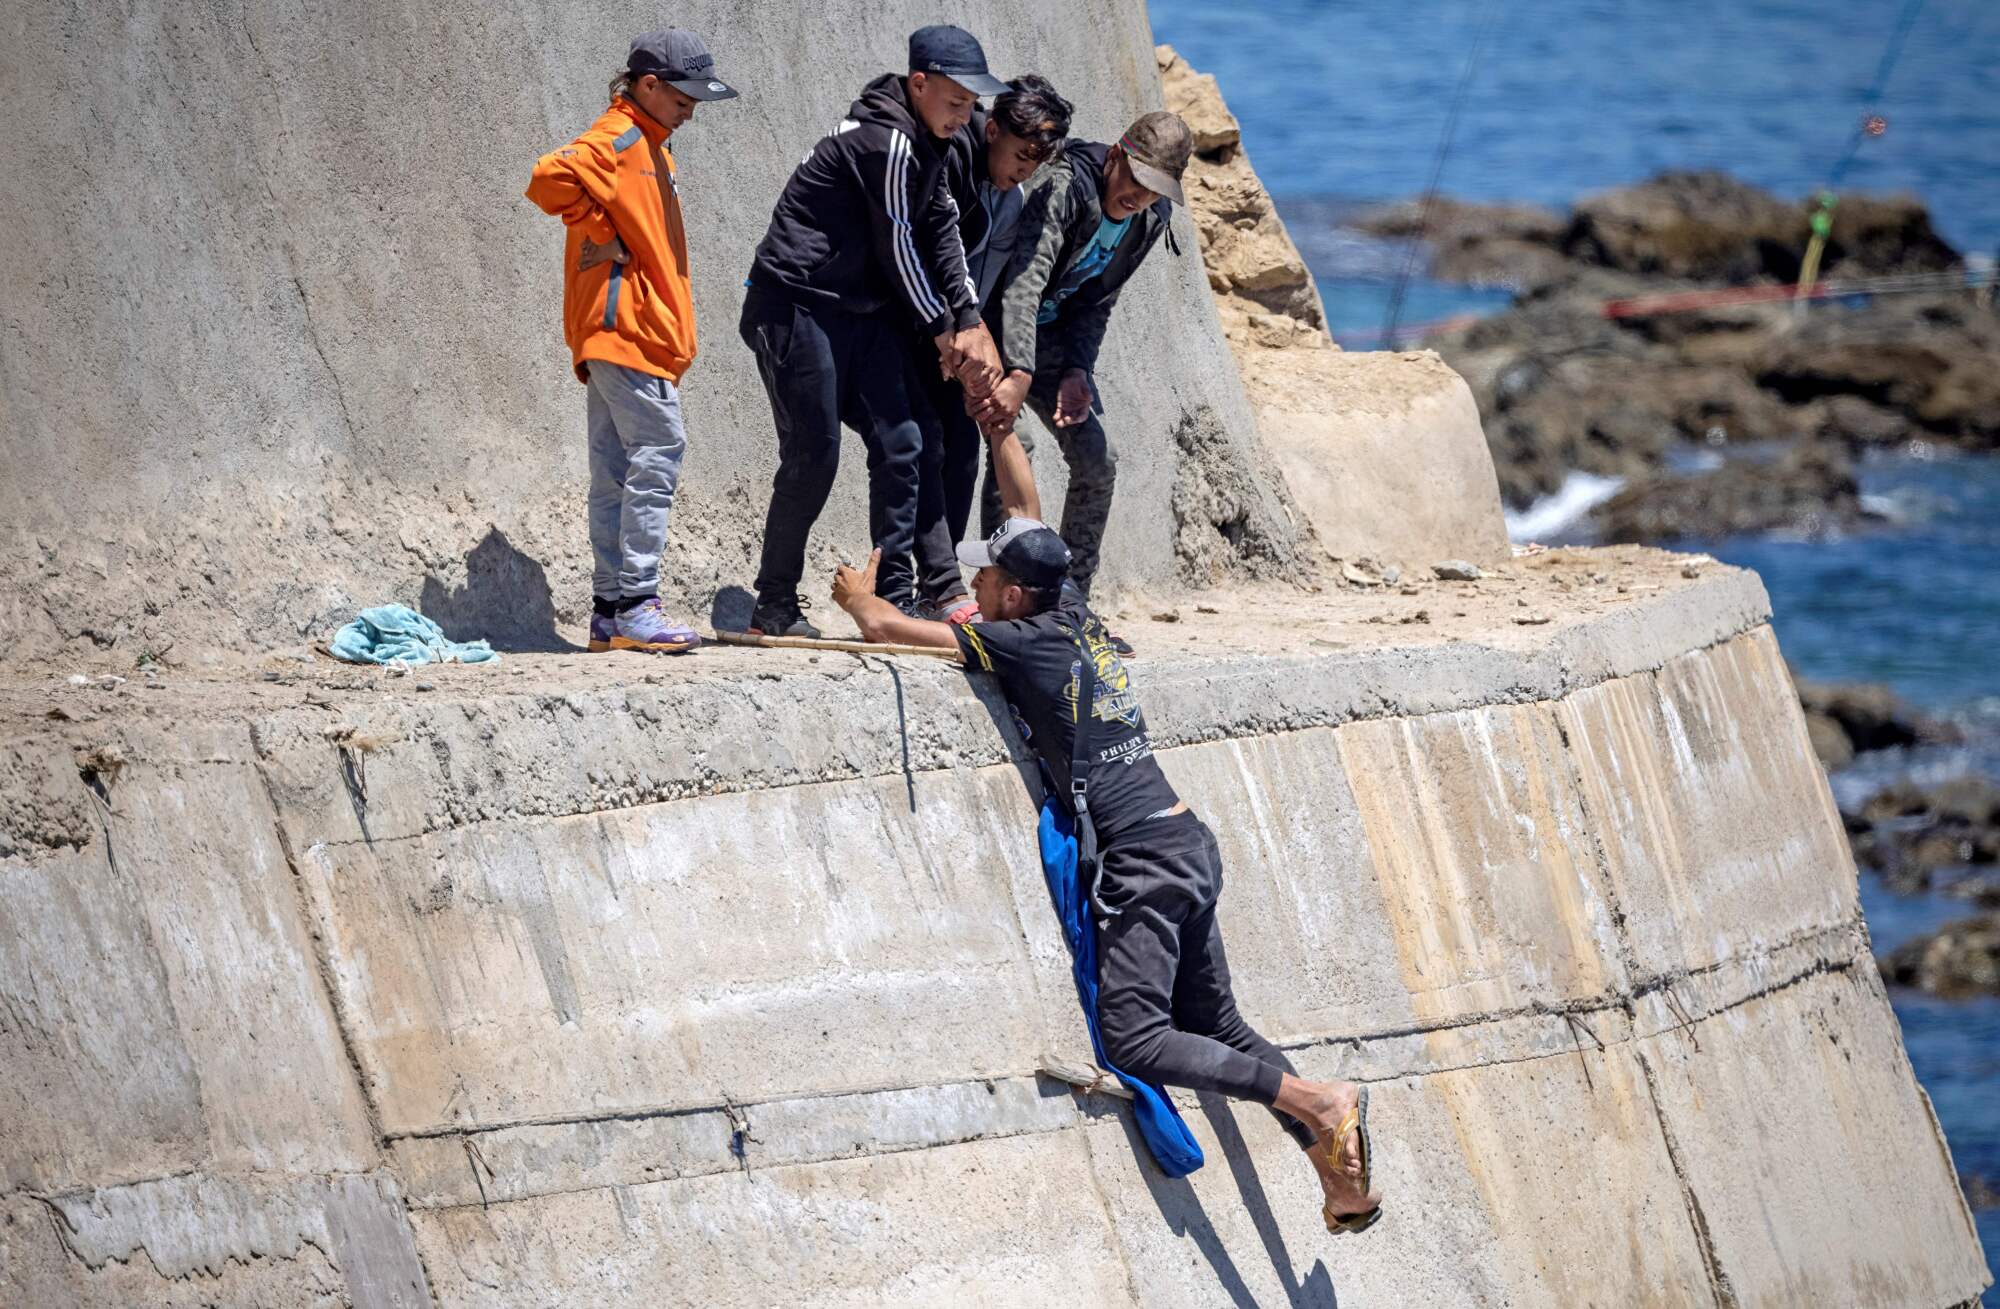 Four boys reach down to help pull up a fifth while climbing a concrete sea wall